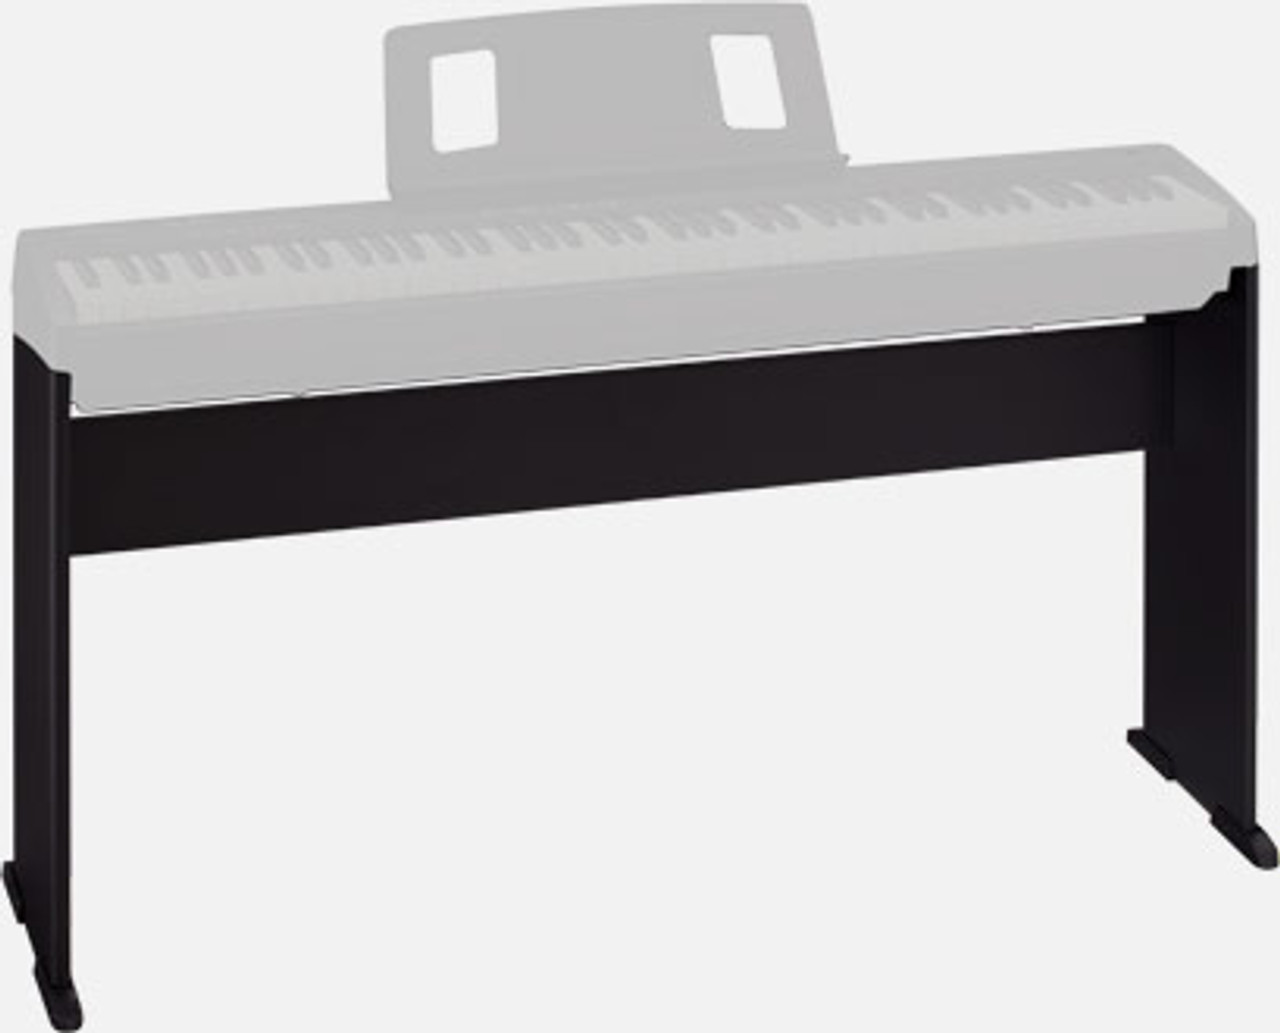 Stand for FP-10 Digital Piano